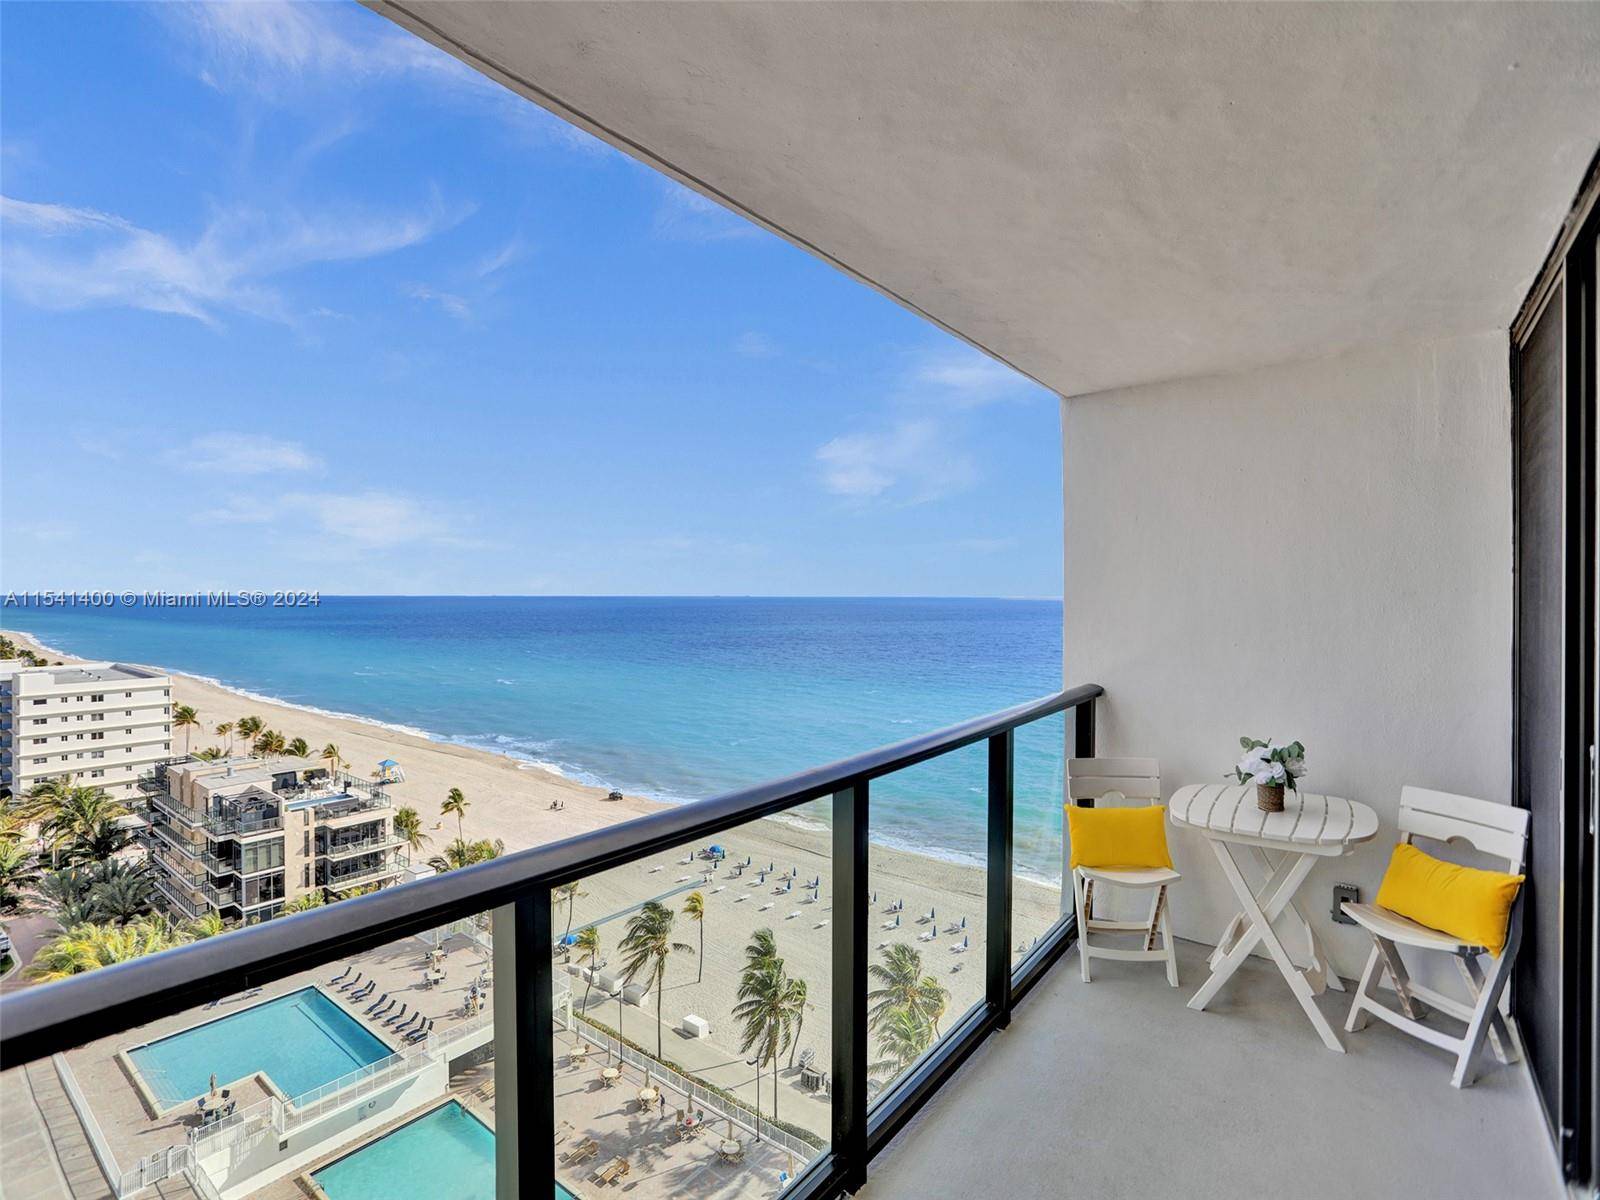 Enjoy stunning ocean and city skyline views from your spacious 2 bedroom condo on the Beach.